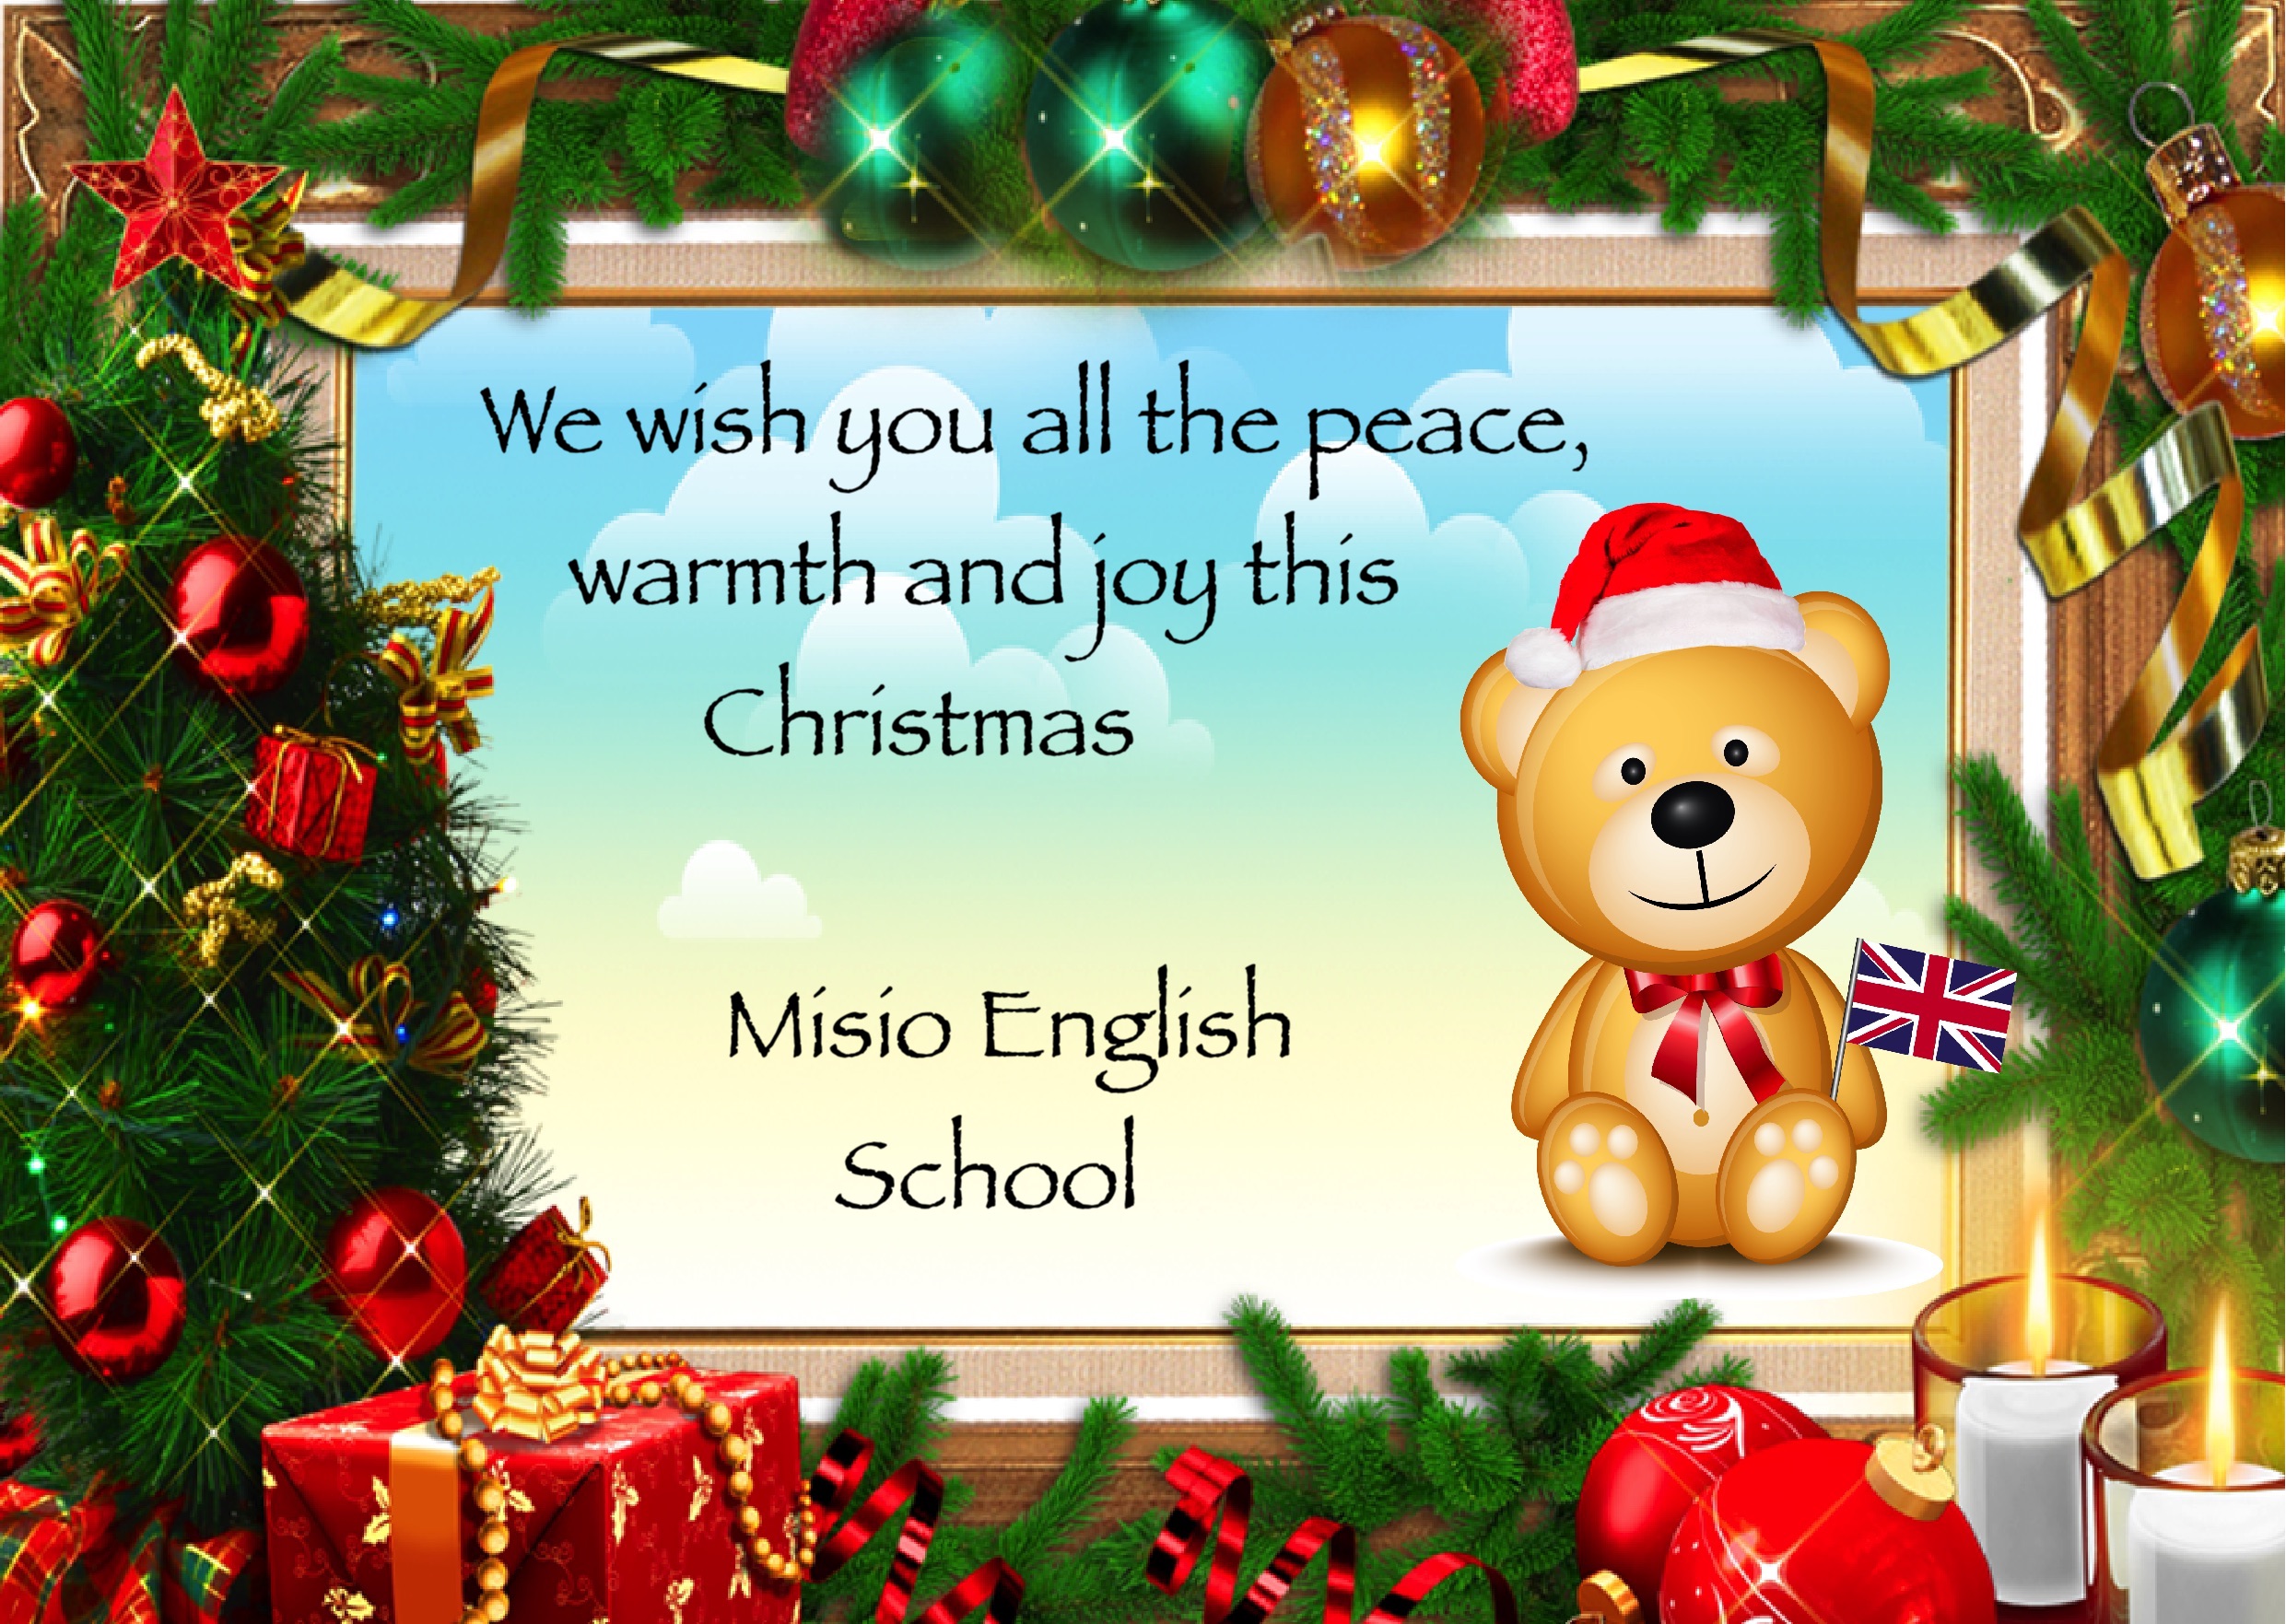 Christmas wishes at Misio English School